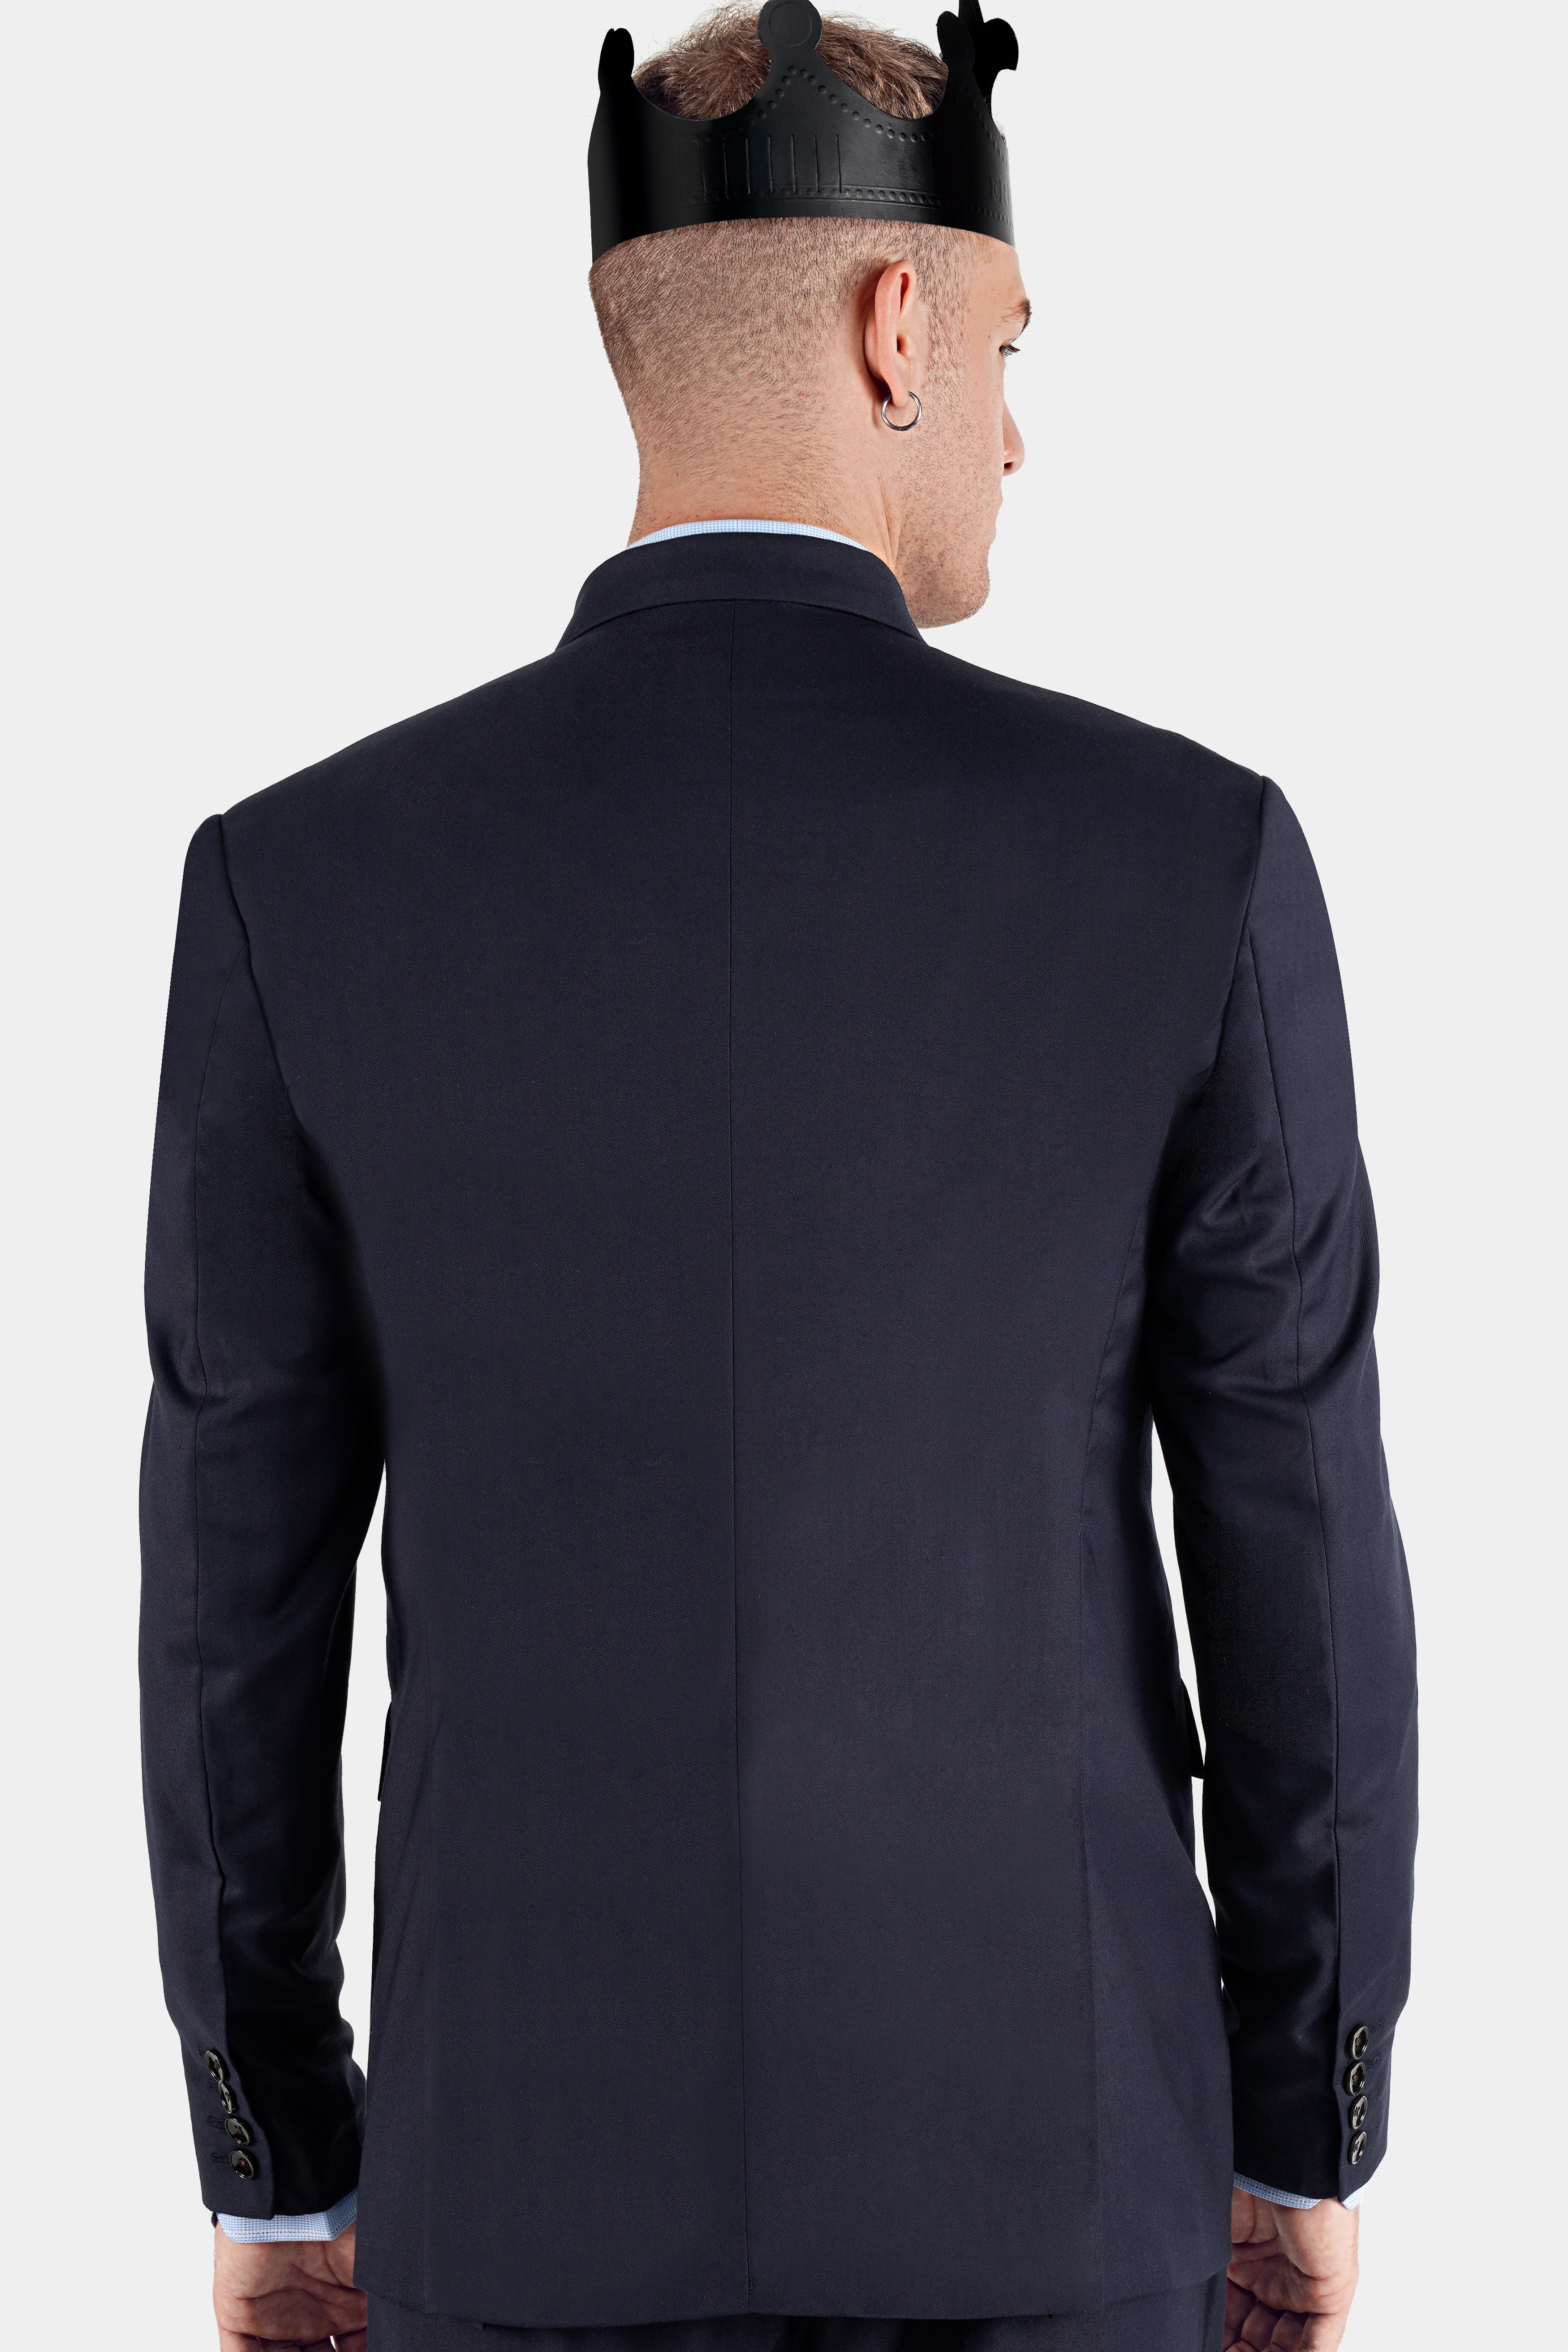 Mirage Blue Wool Rich Double Breasted Blazer BL2727-DB-36, BL2727-DB-38, BL2727-DB-40, BL2727-DB-42, BL2727-DB-44, BL2727-DB-46, BL2727-DB-48, BL2727-DB-50, BL2727-DB-52, BL2727-DB-54, BL2727-DB-56, BL2727-DB-58, BL2727-DB-60